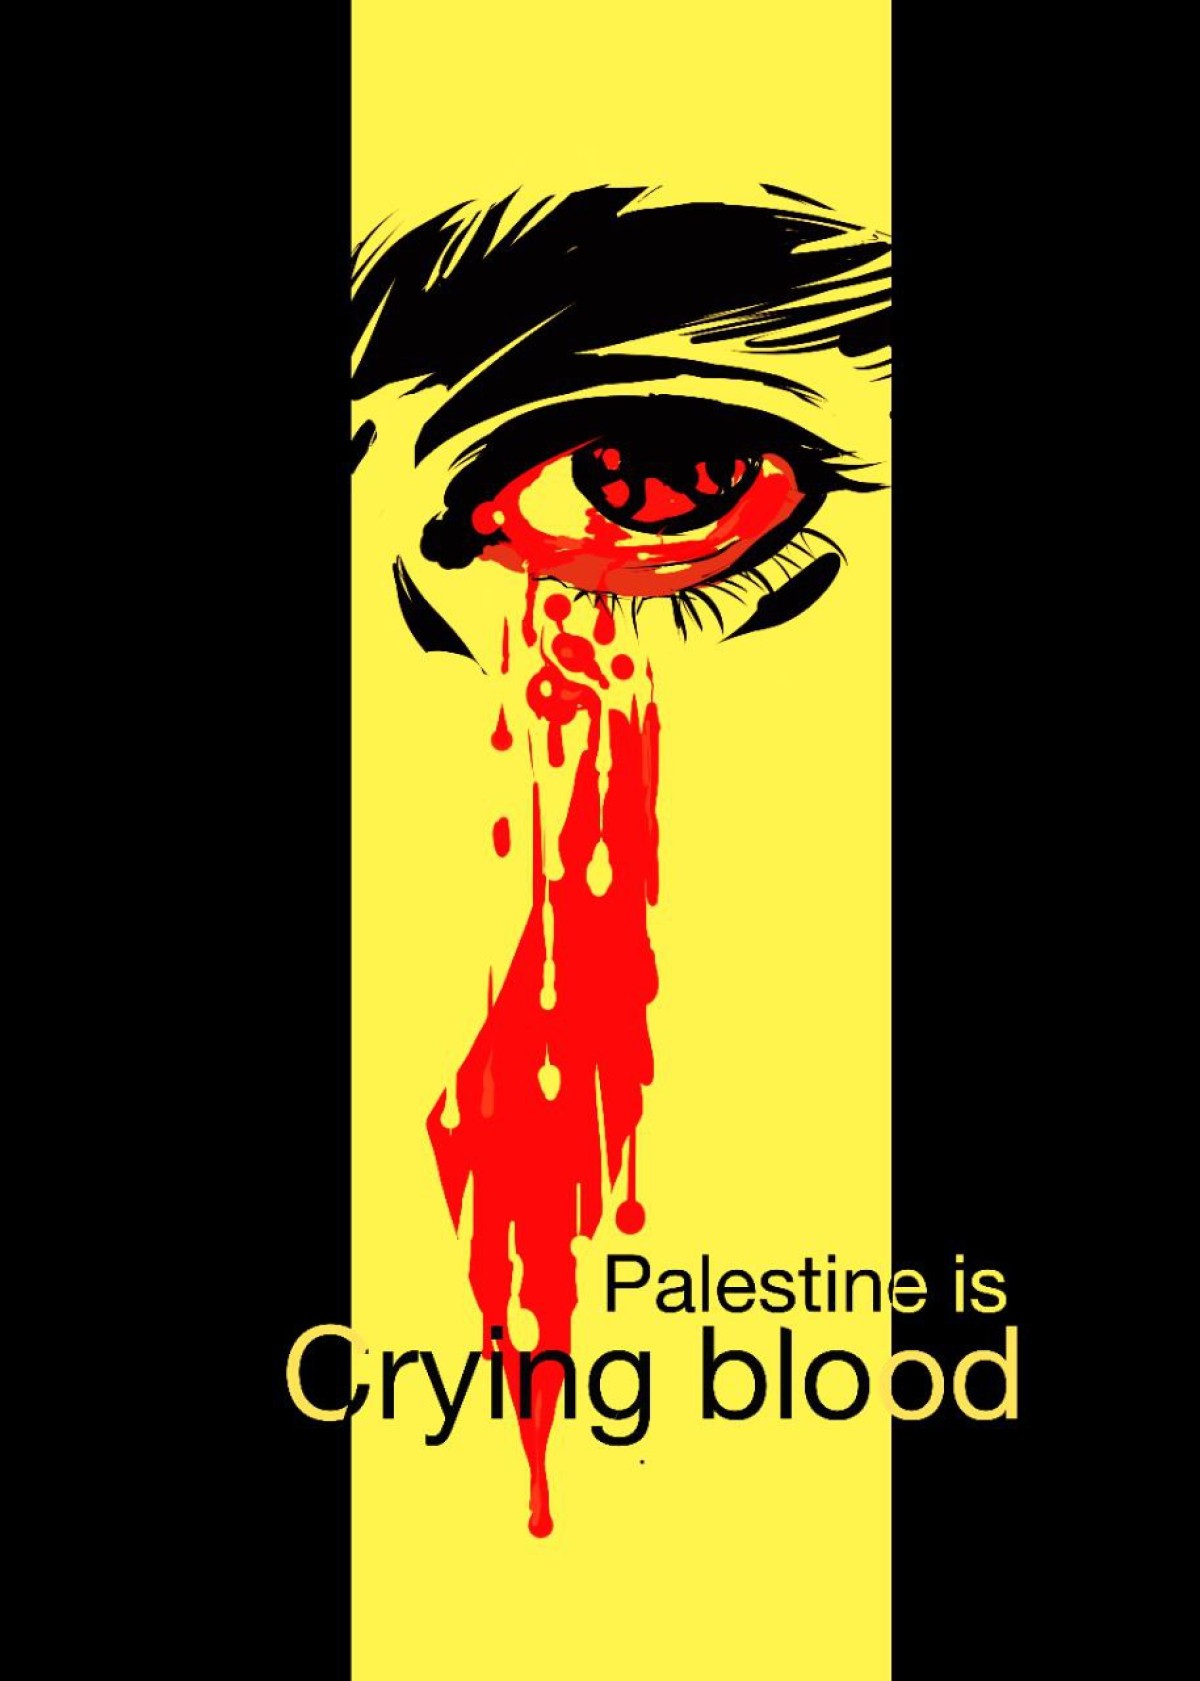 Palestine is crying blood